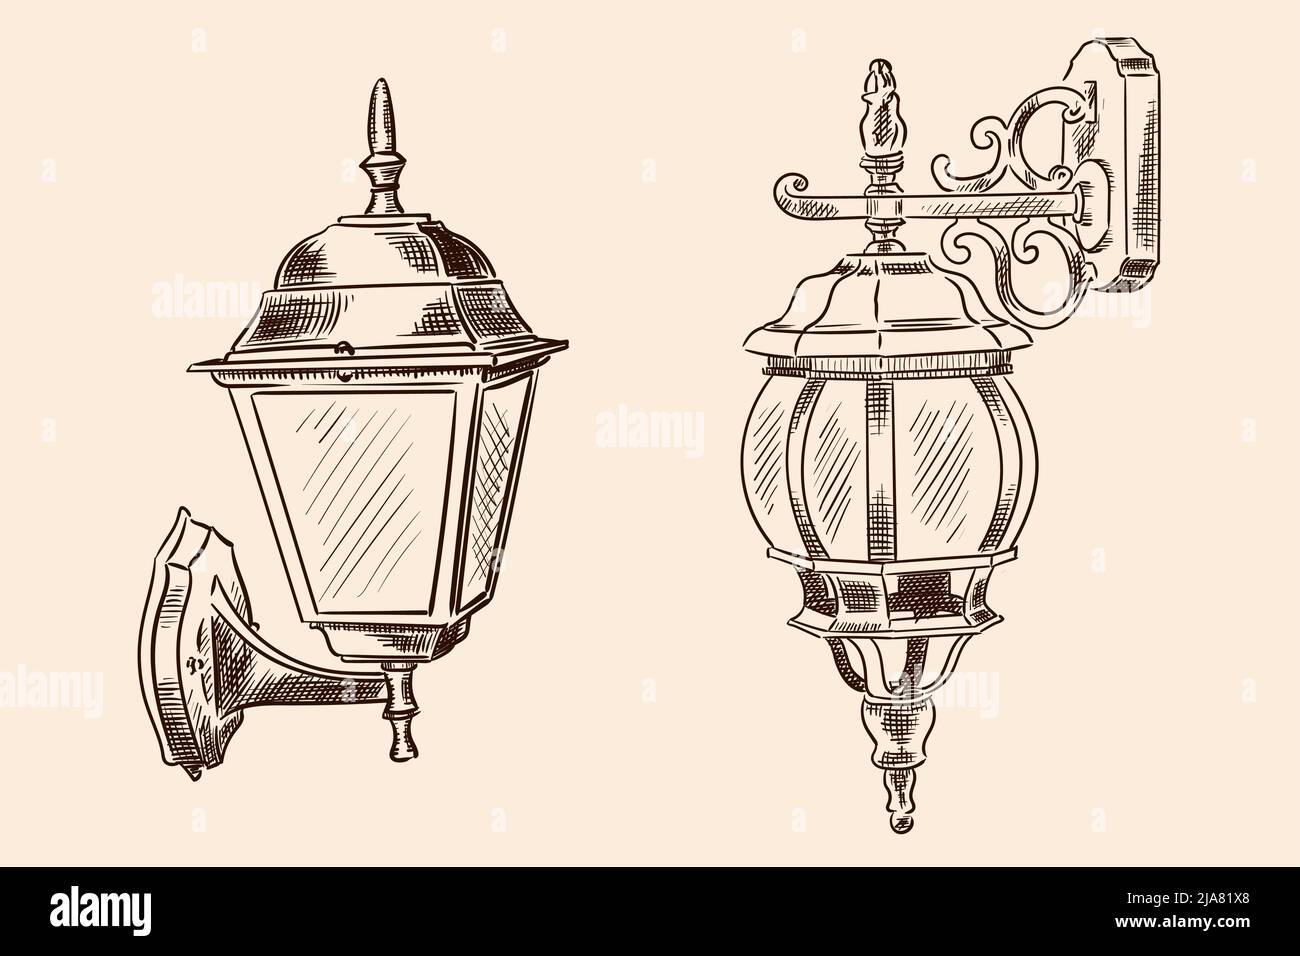 Hanging wall lamp in classic style for street lighting. Handmade sketch on a beige background. Stock Vector